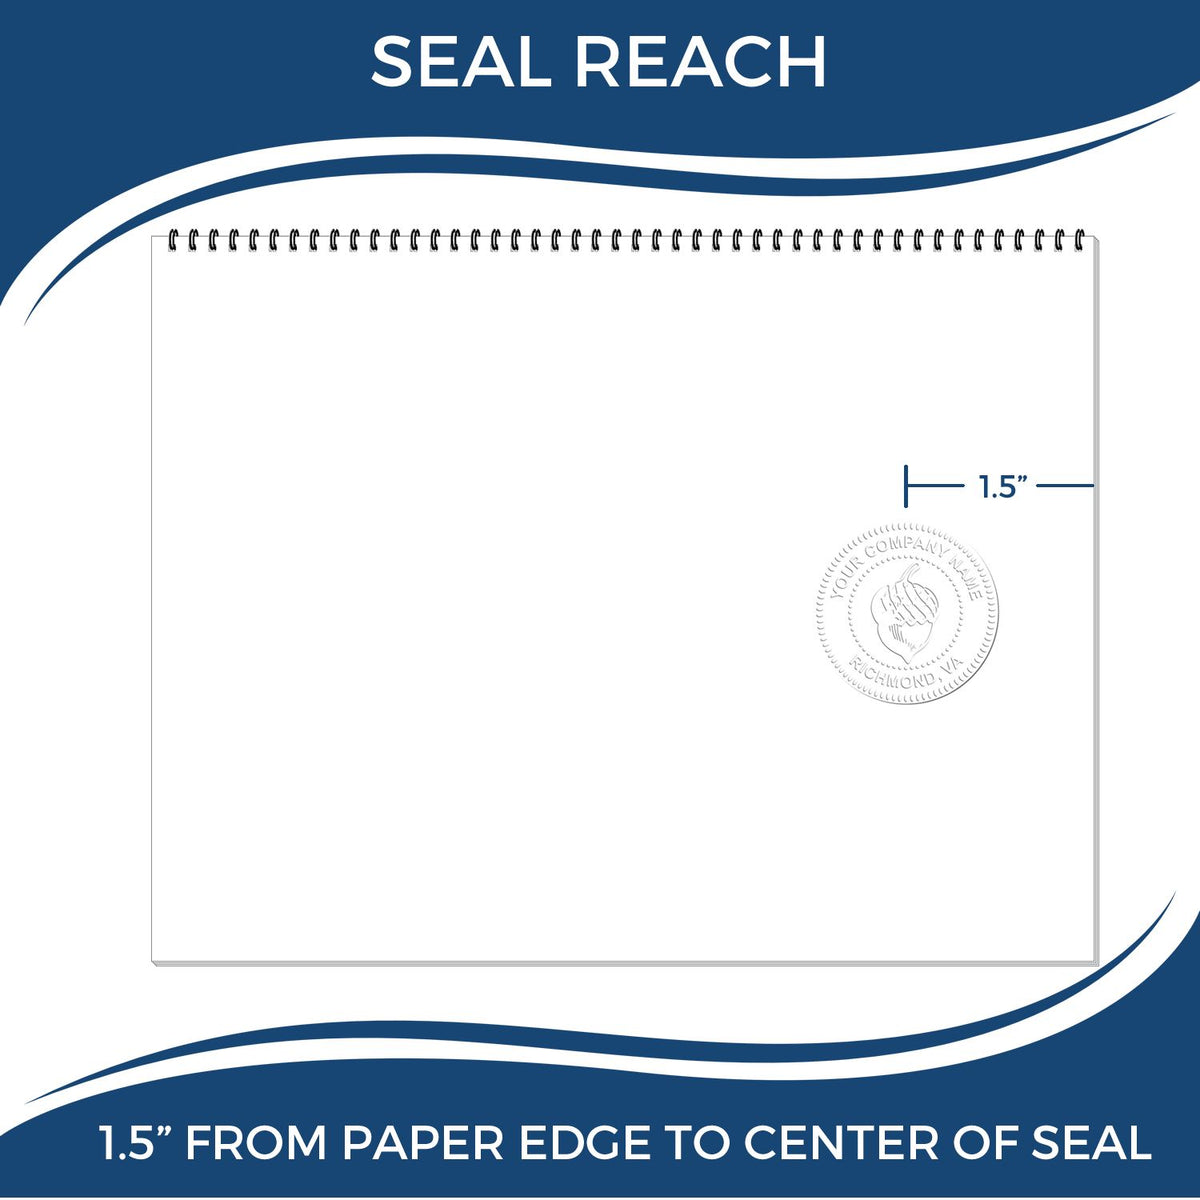 An infographic showing the seal reach which is represented by a ruler and a miniature seal image of the State of North Carolina Soft Land Surveyor Embossing Seal